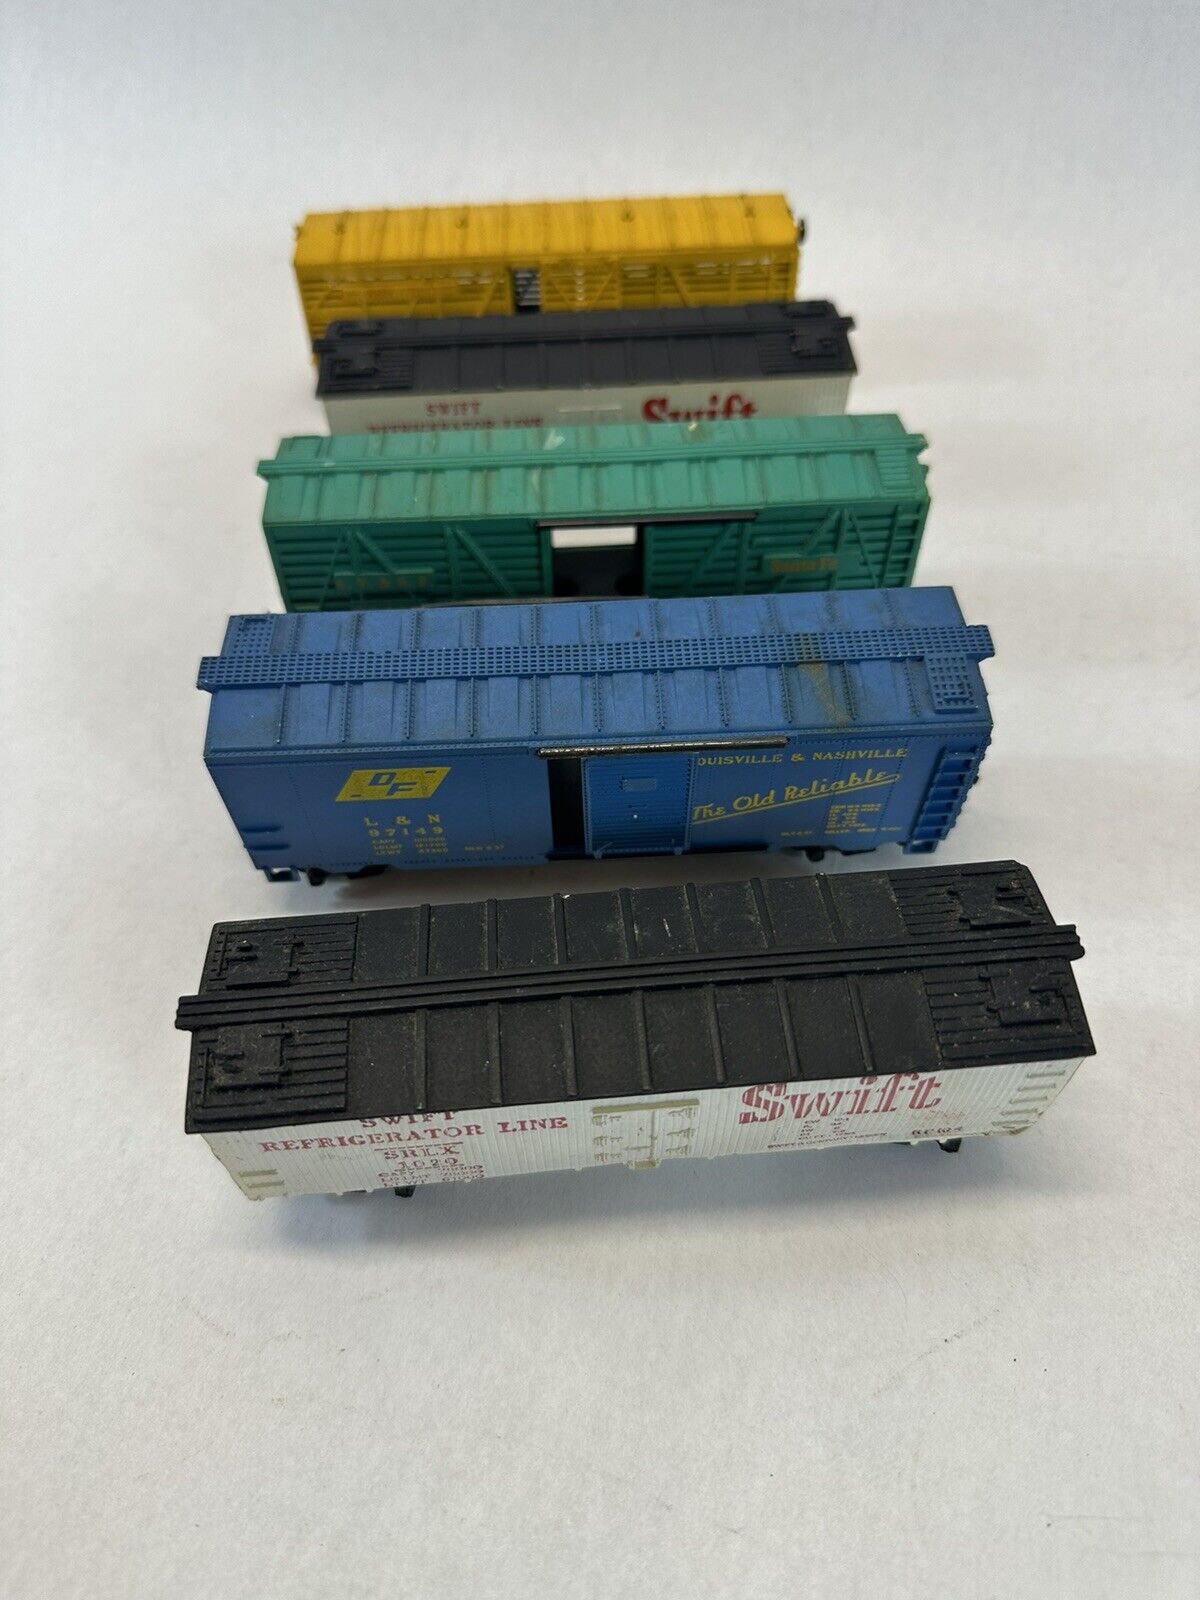 Lionel Set of 5 Freight Cars. These Are All Older Box Cars In Rolling Condition